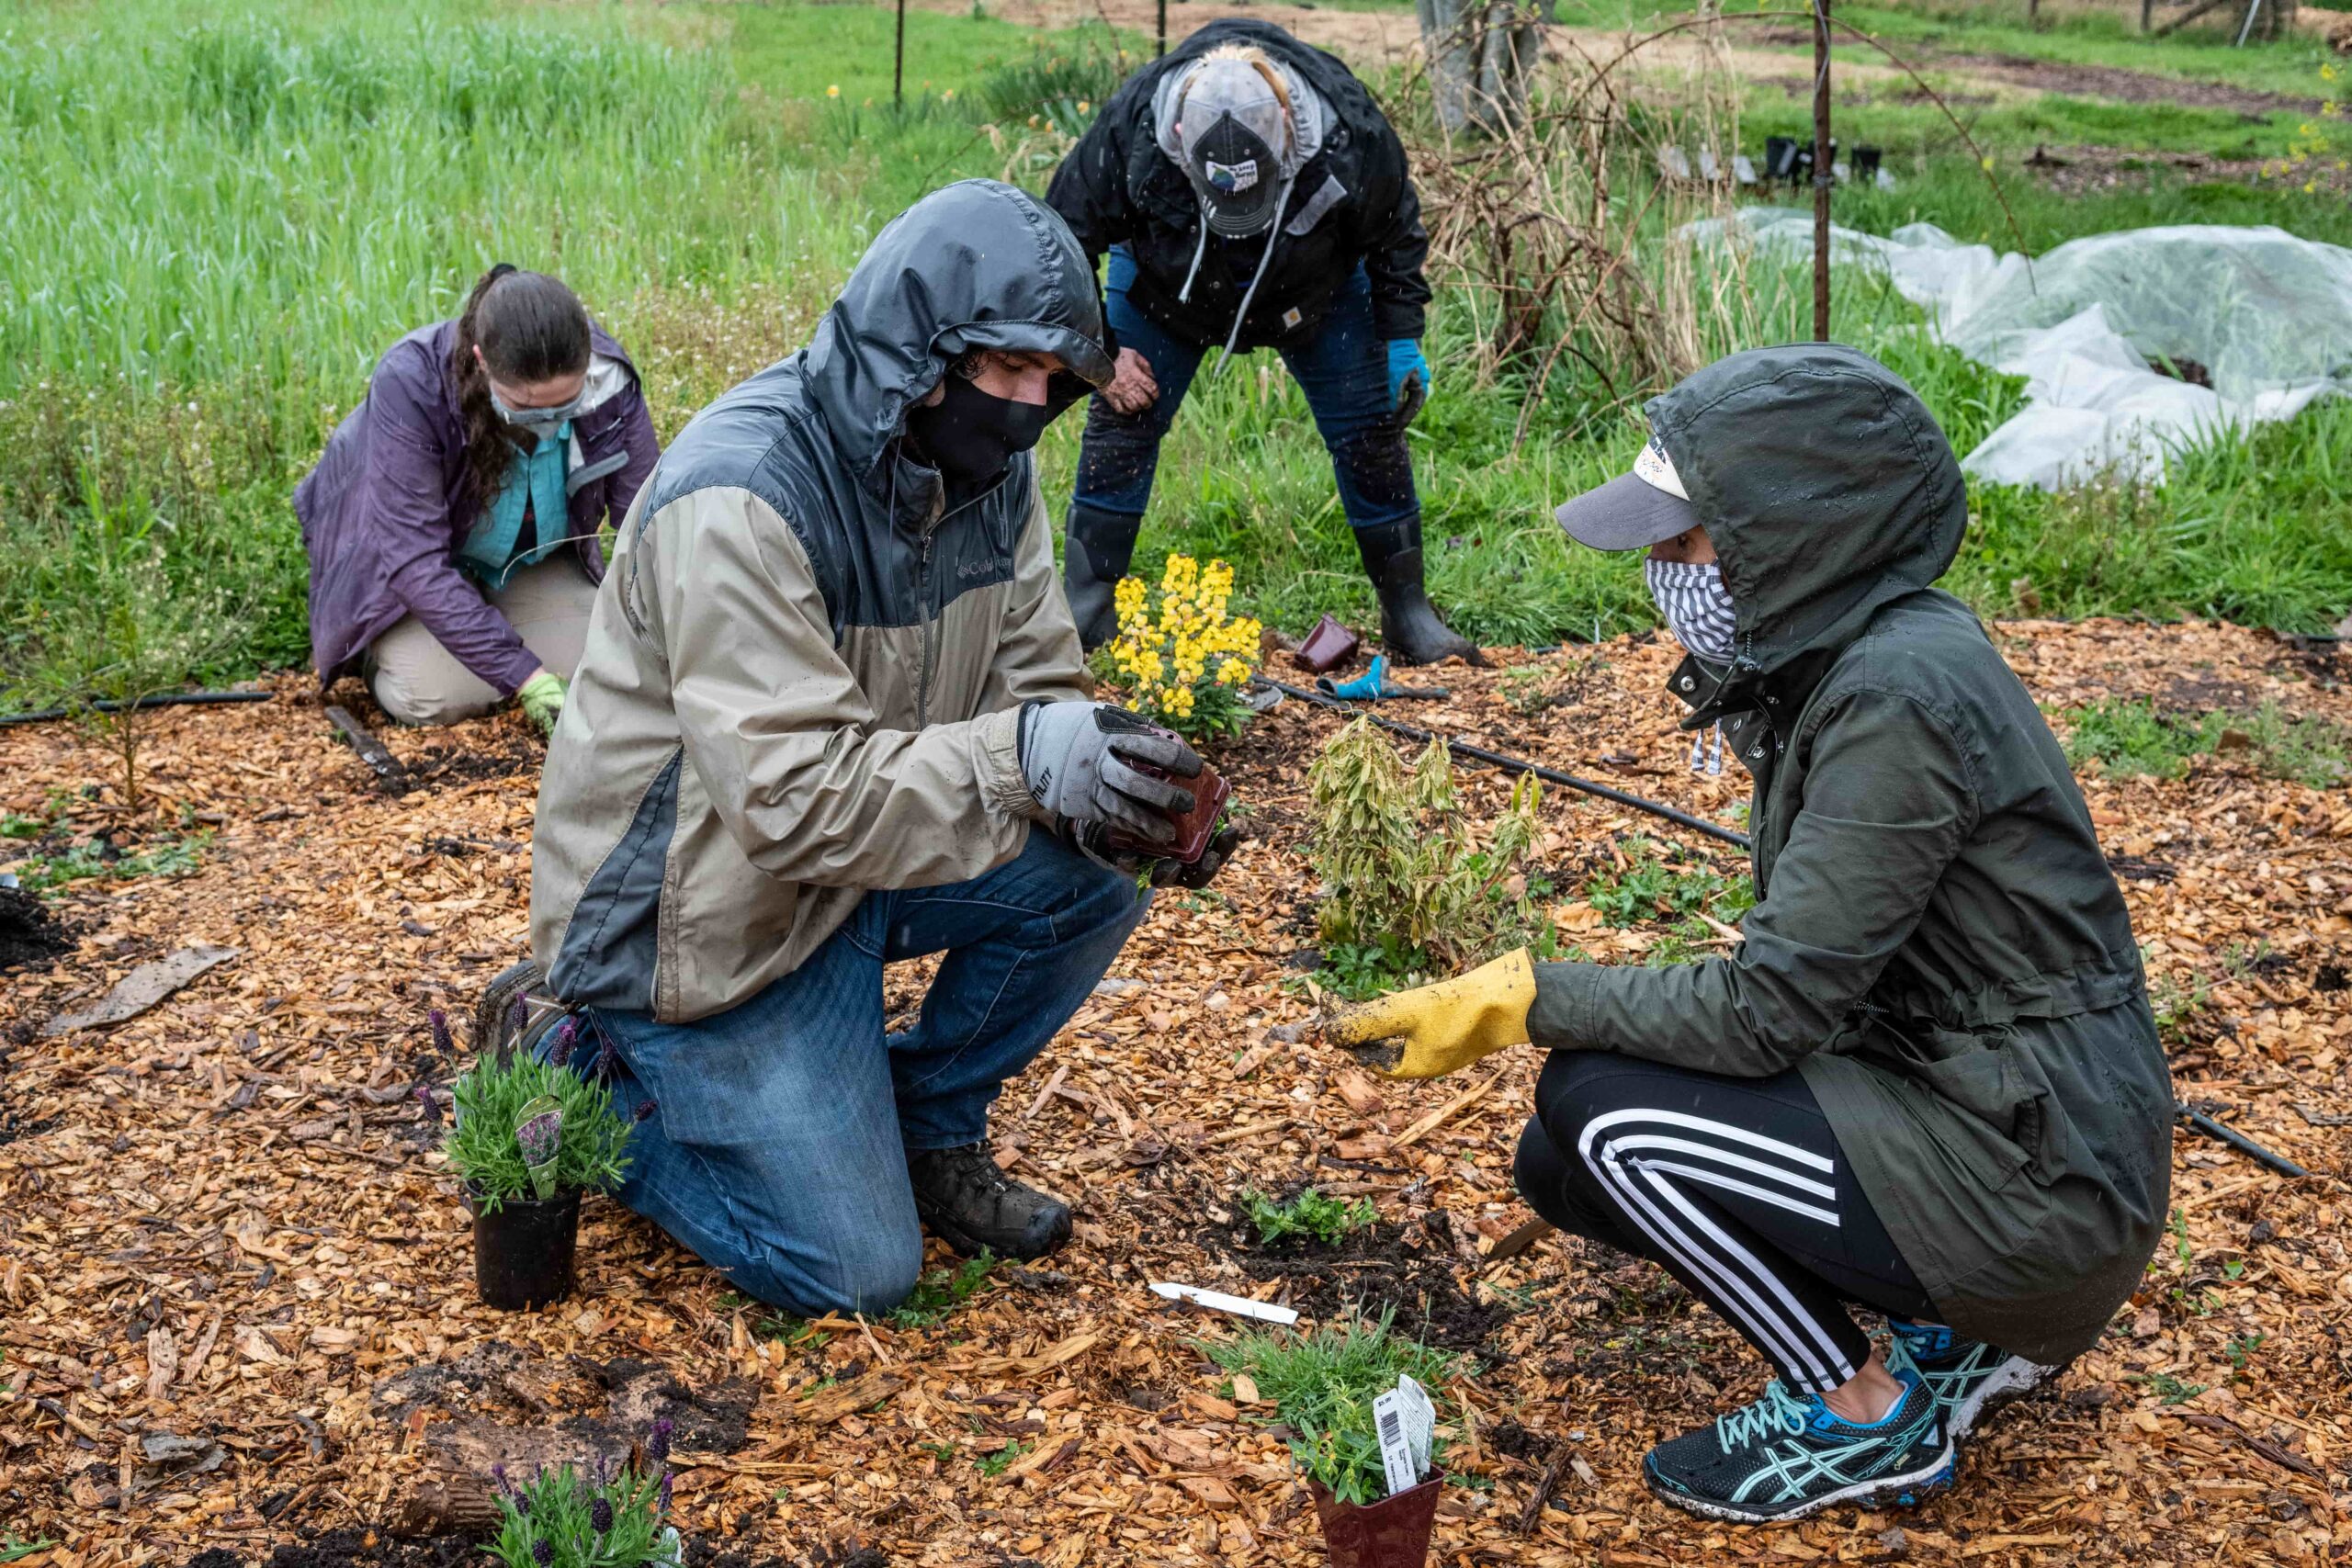 Volunteers plant out the pollinator garden at 21 Acres.